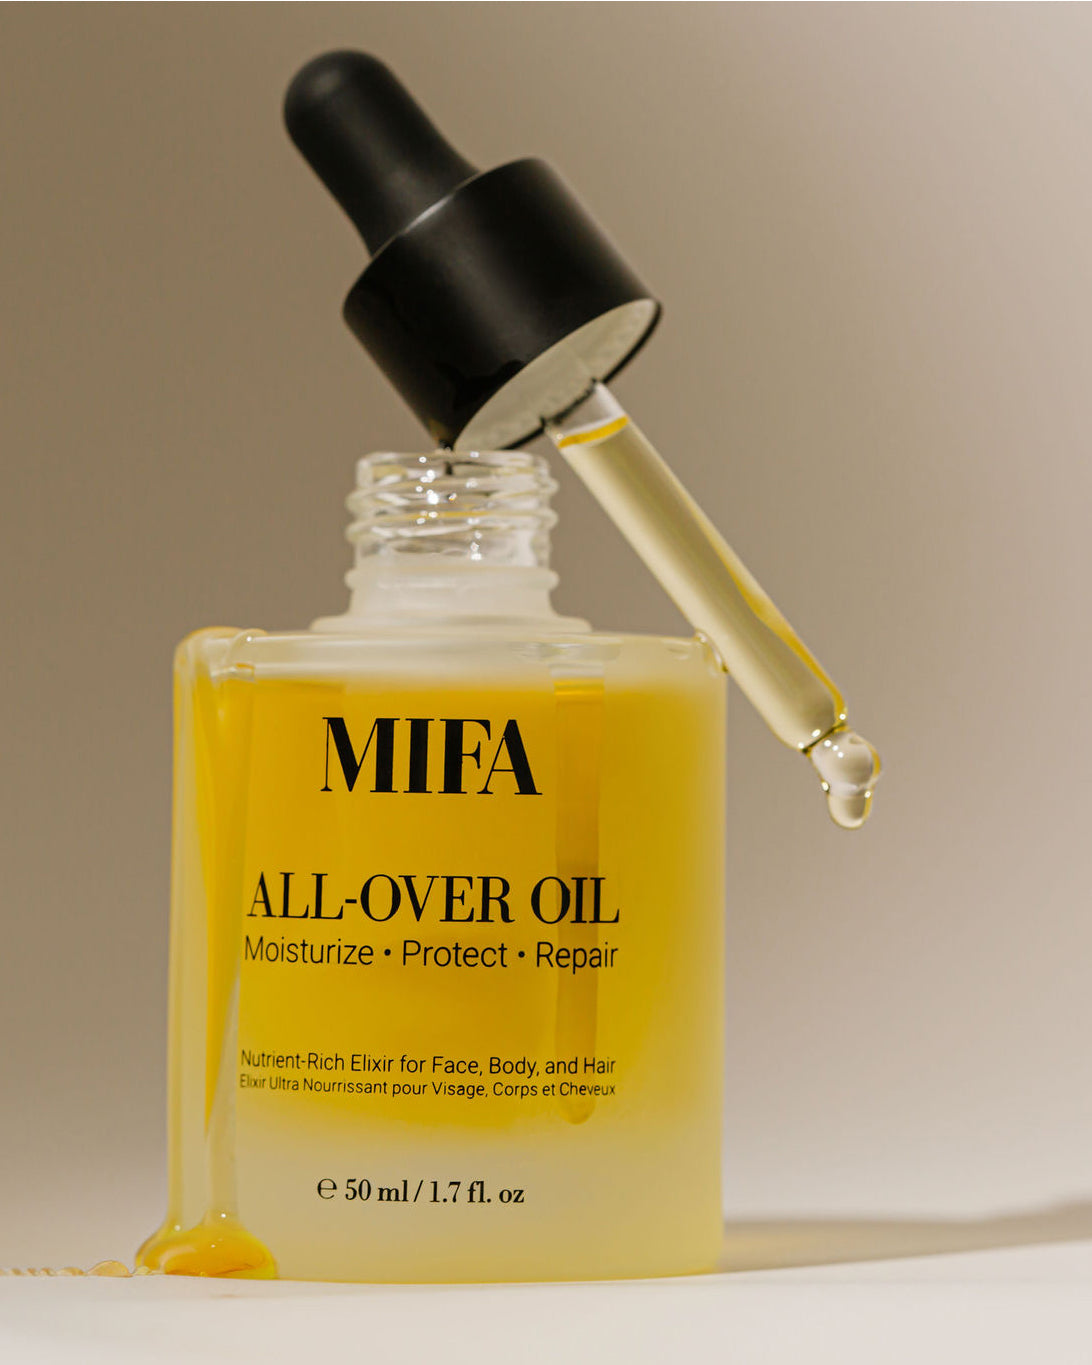 All-Over Oil